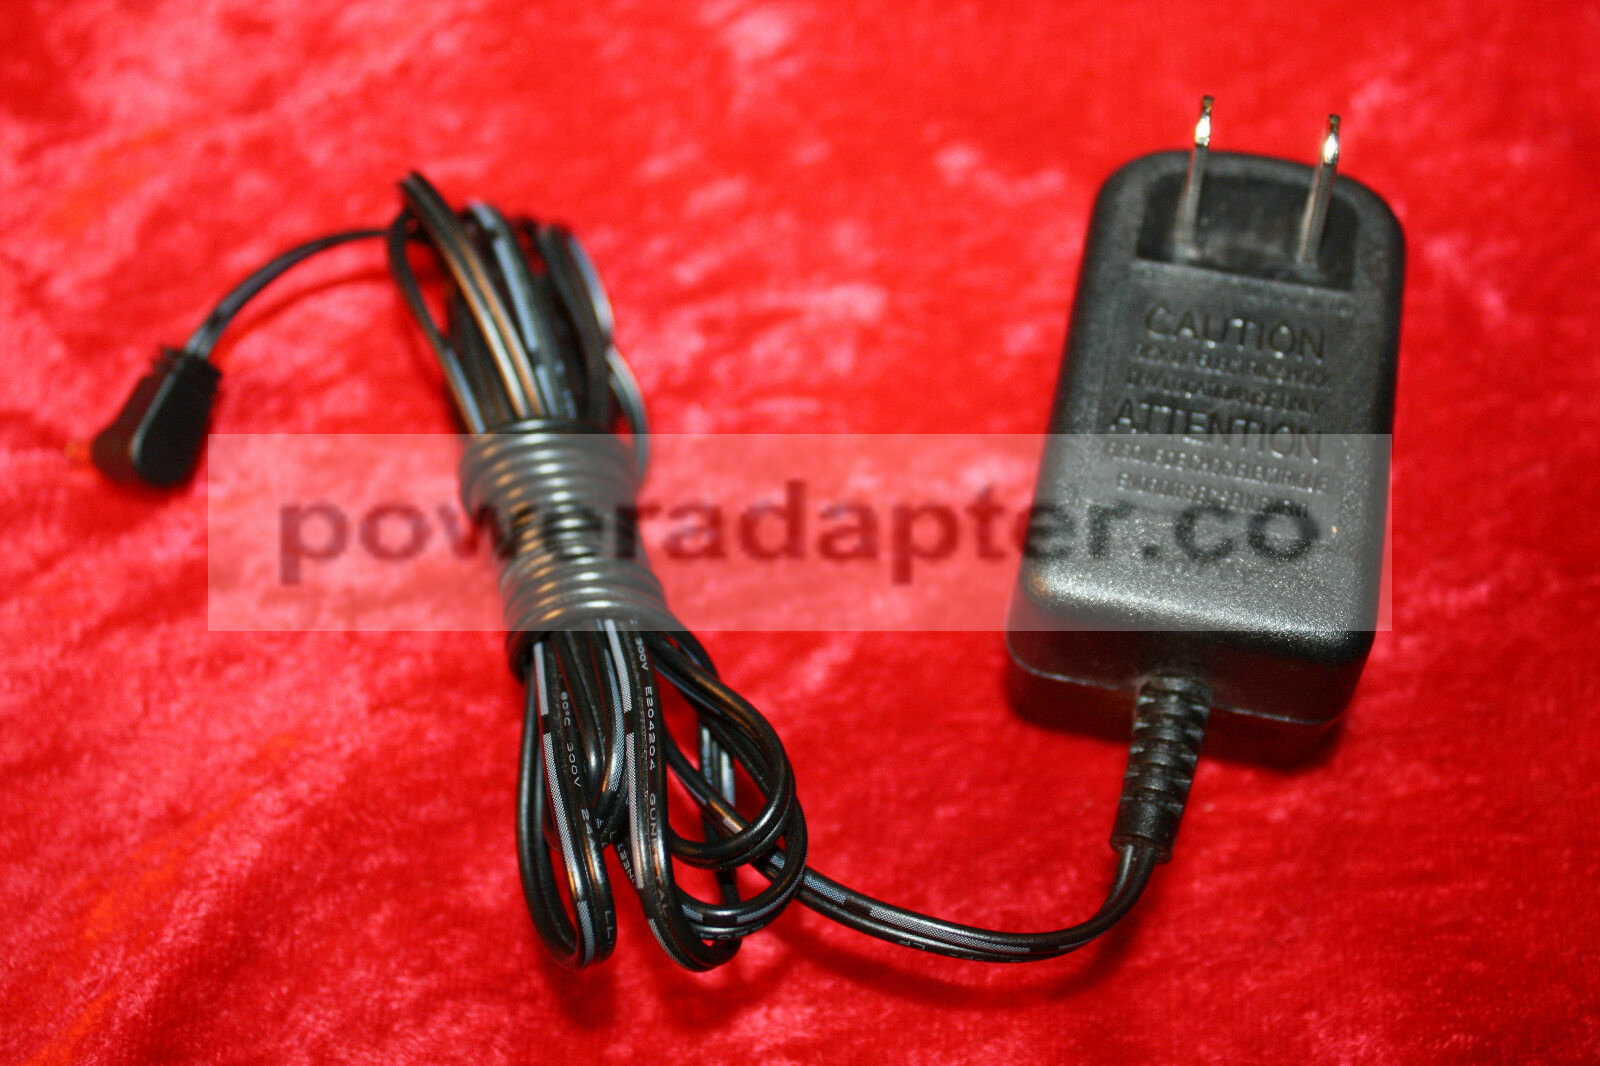 Component Telephone U090025A12 AC Adapter Supply Vtech AC9V 120V 60Hz 6.5W 250mA Condition: new Seller Notes: “May c